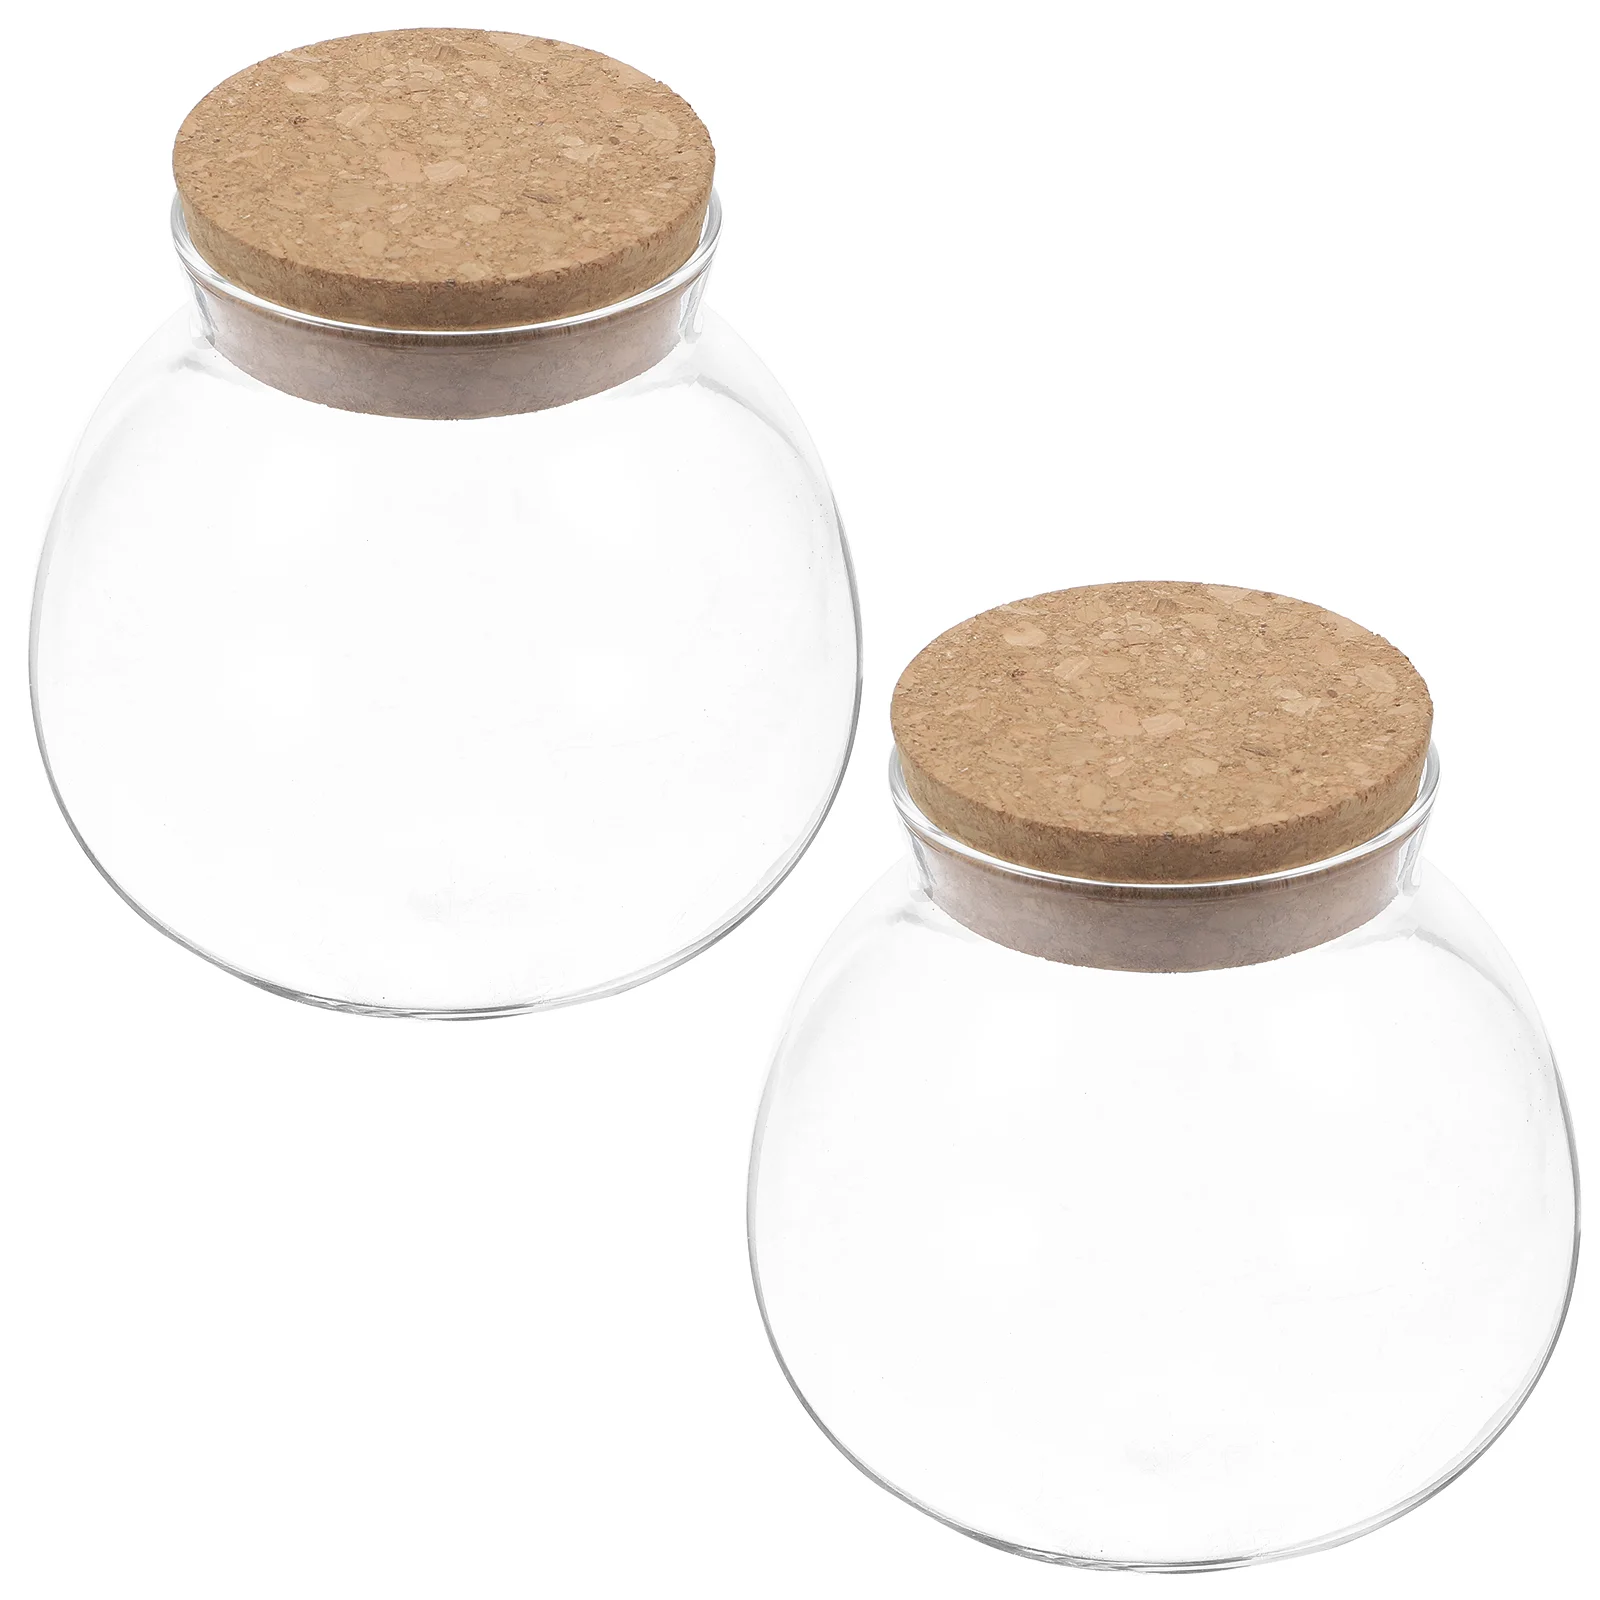 

2 Pcs Glass Jar Small Sugar Container with Cork Lid Tea Sealed Canister Canisters Airtight Lids Coffee Decorative Jars Kitchen